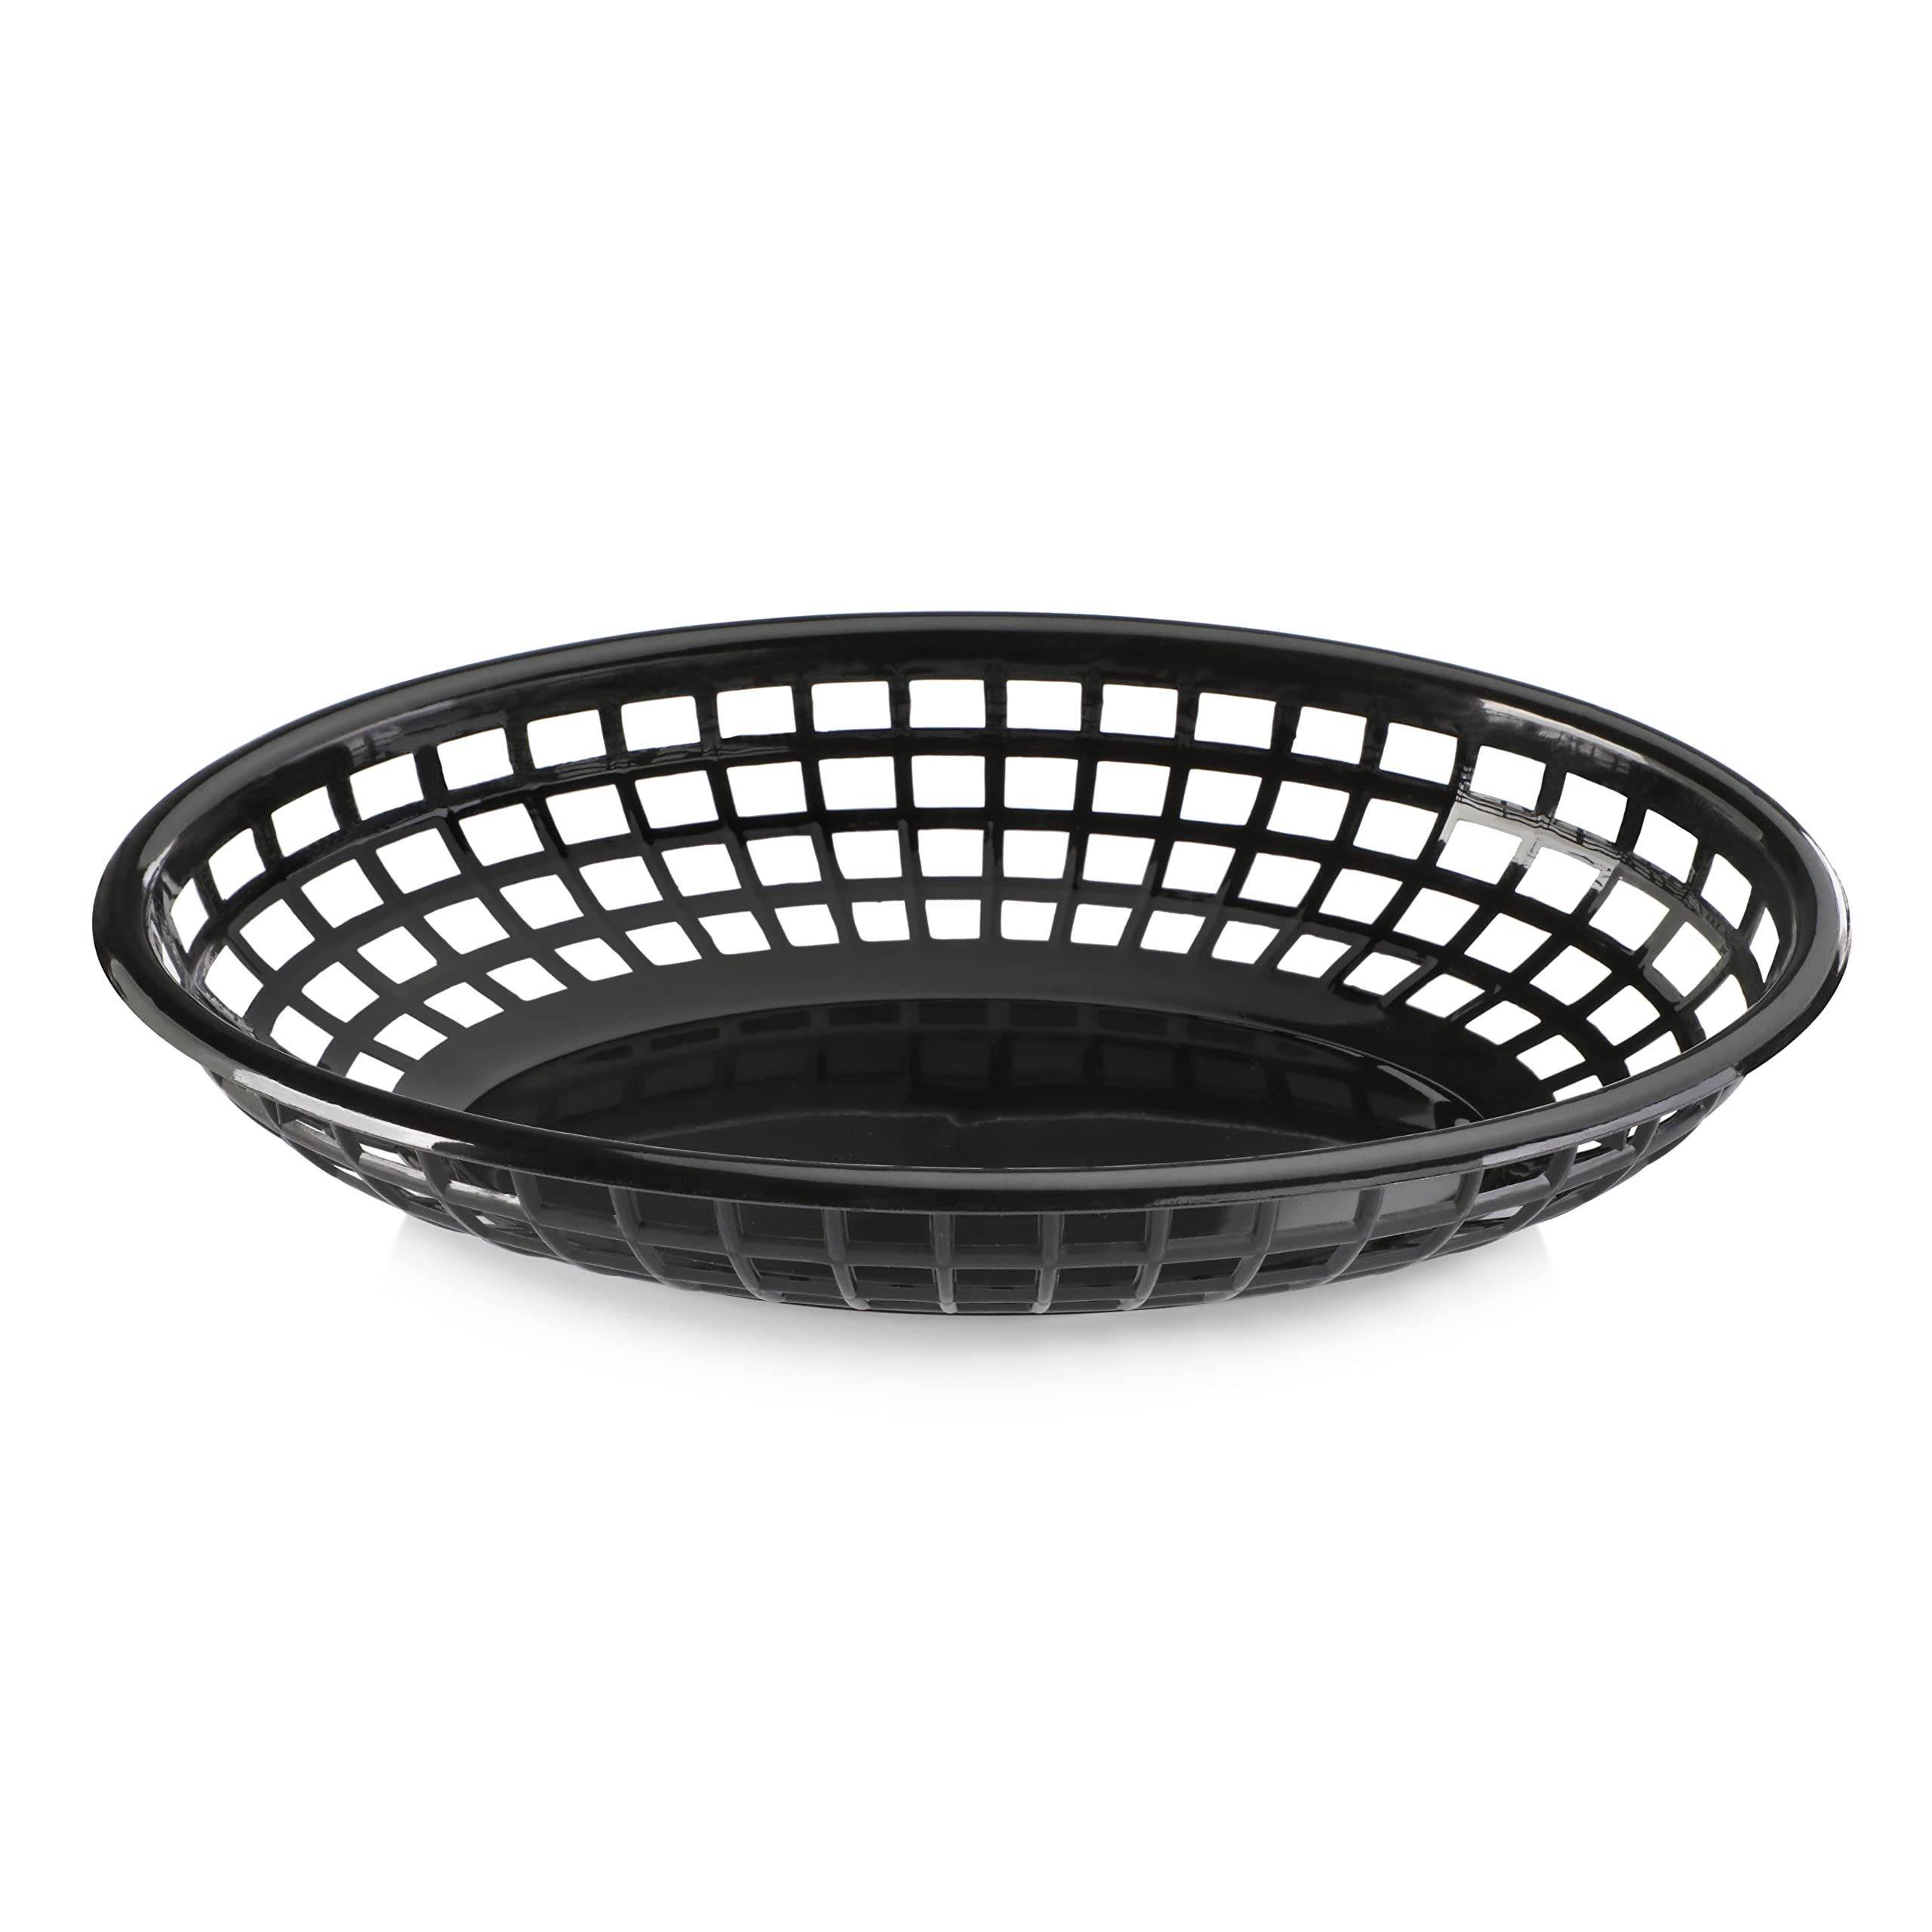 New Star Foodservice 44140 Fast Food Baskets, 9 1/4-Inch x 6-Inch Oval, Set of 12, Black | Amazon (US)